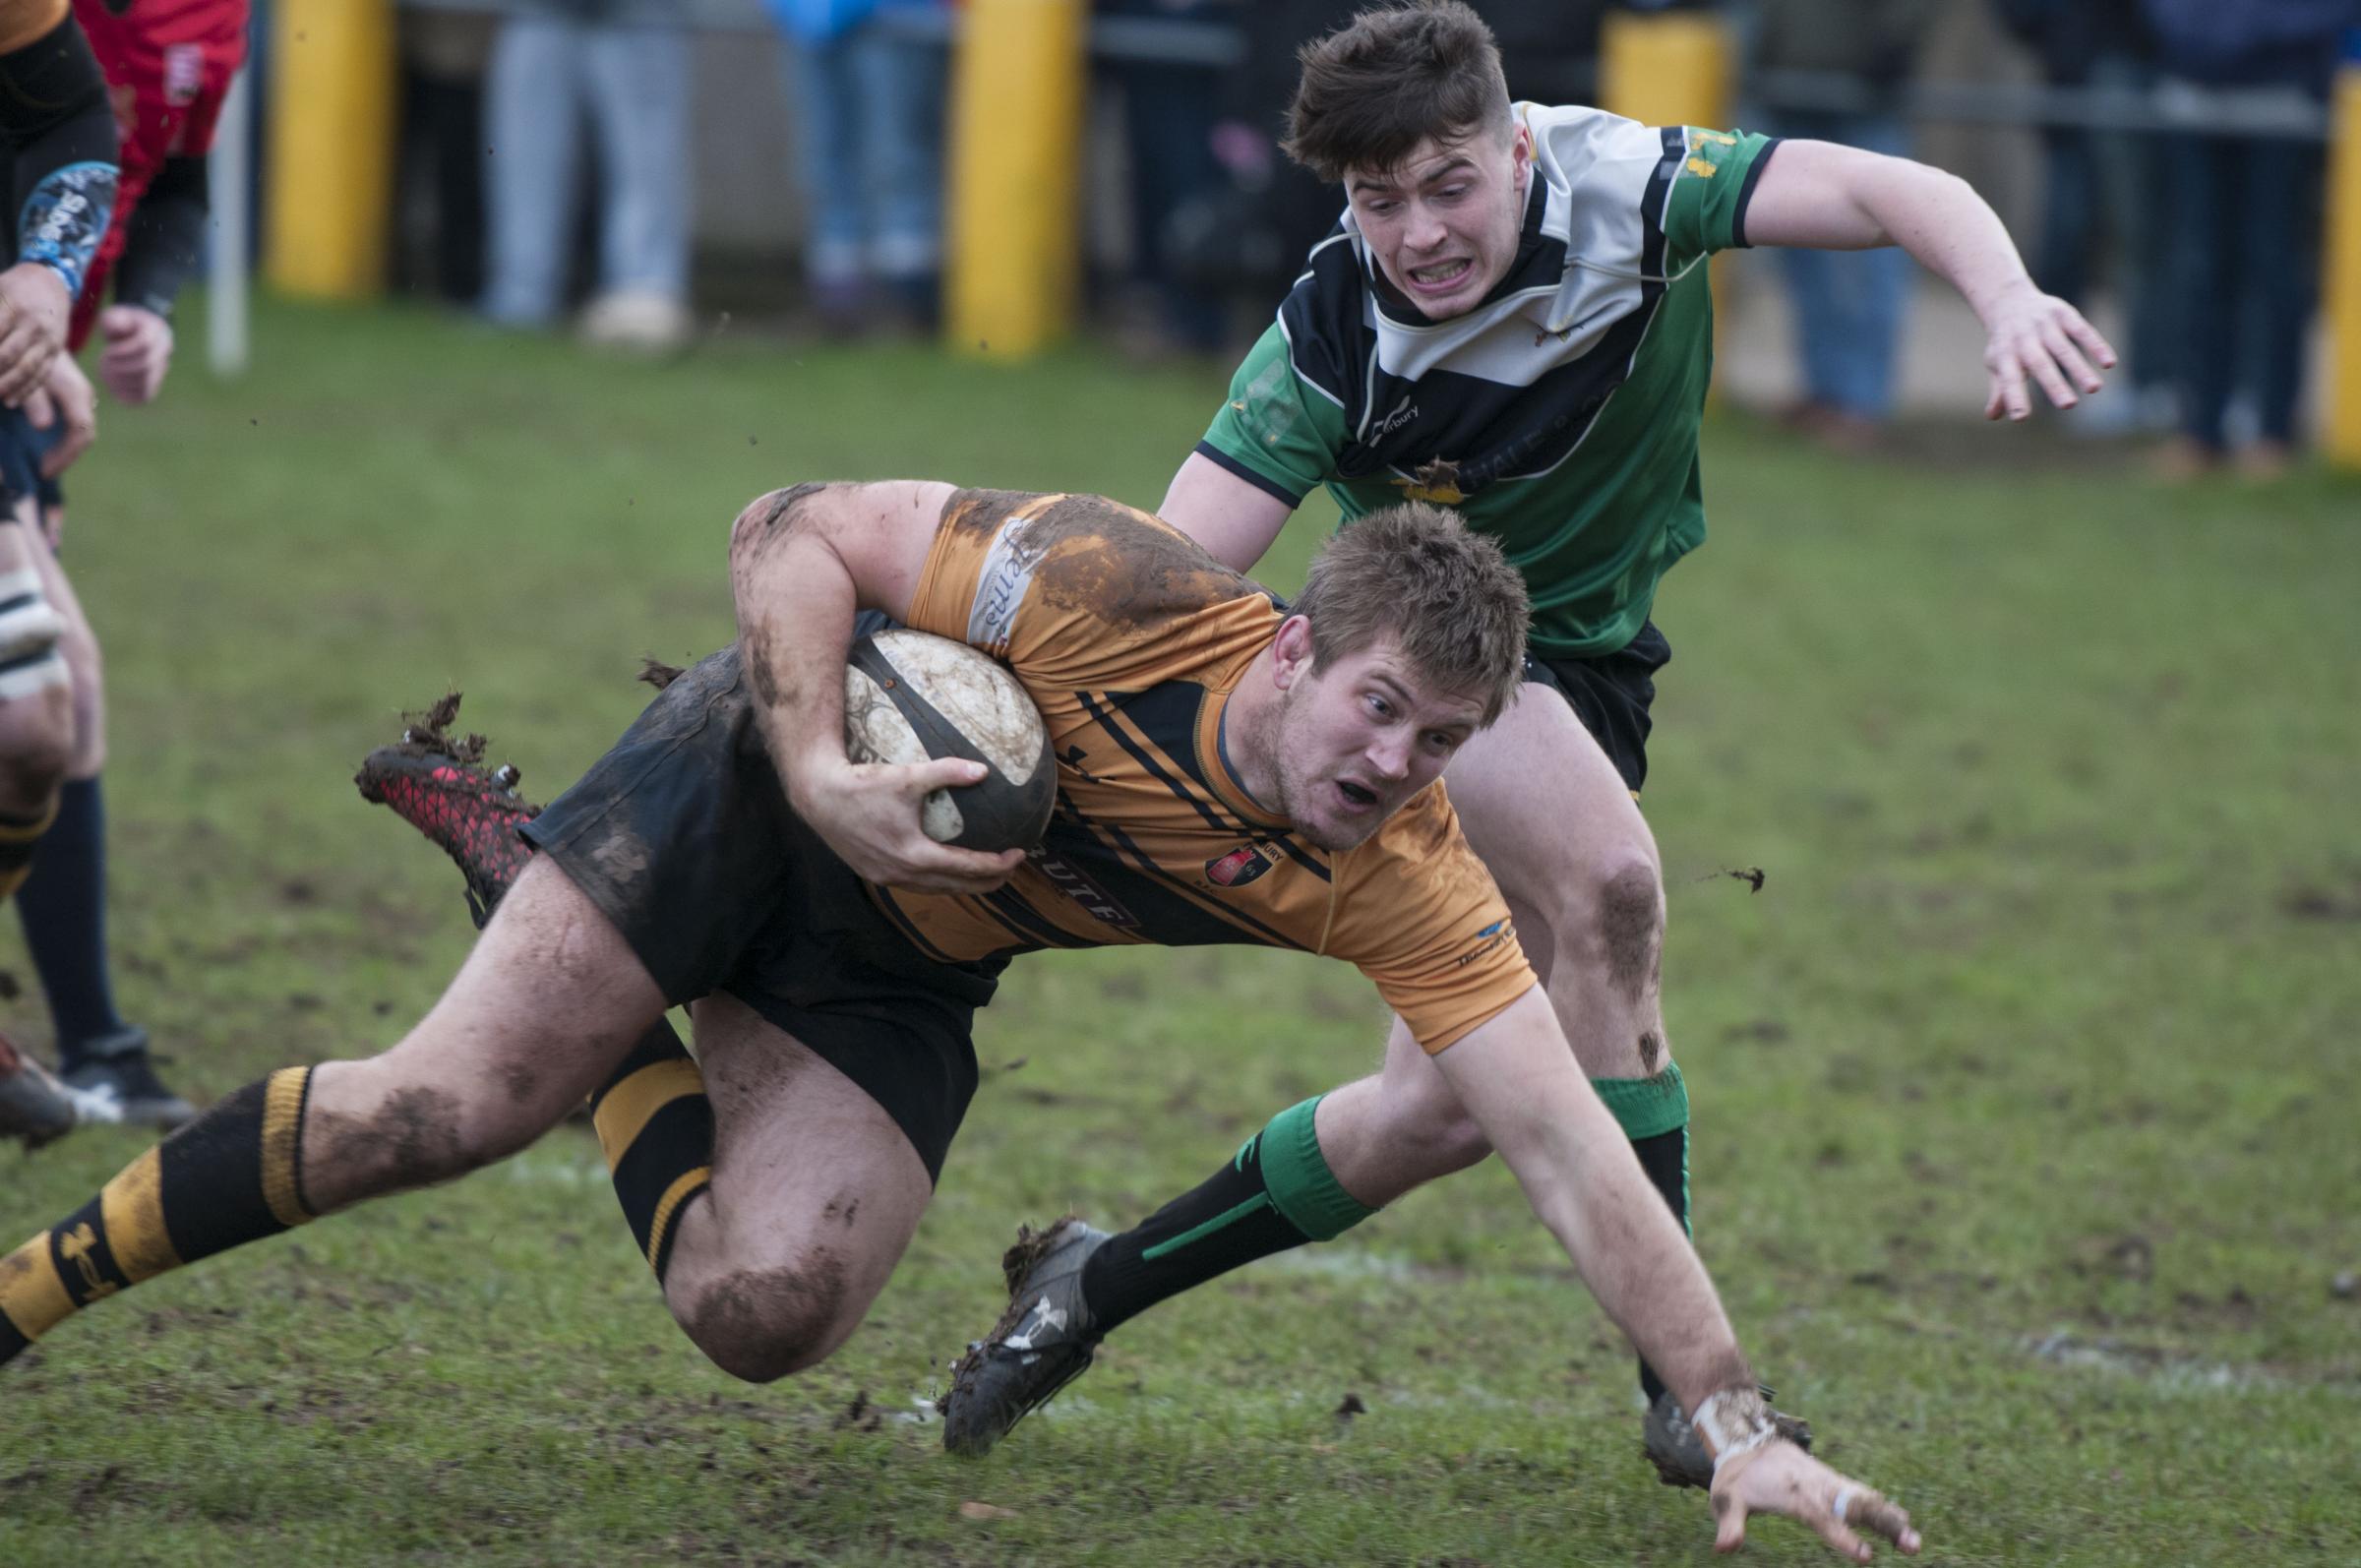 RUGBY: Hussey goes over for try hat-trick as Thornbury beat Drybrook - Gazette Series